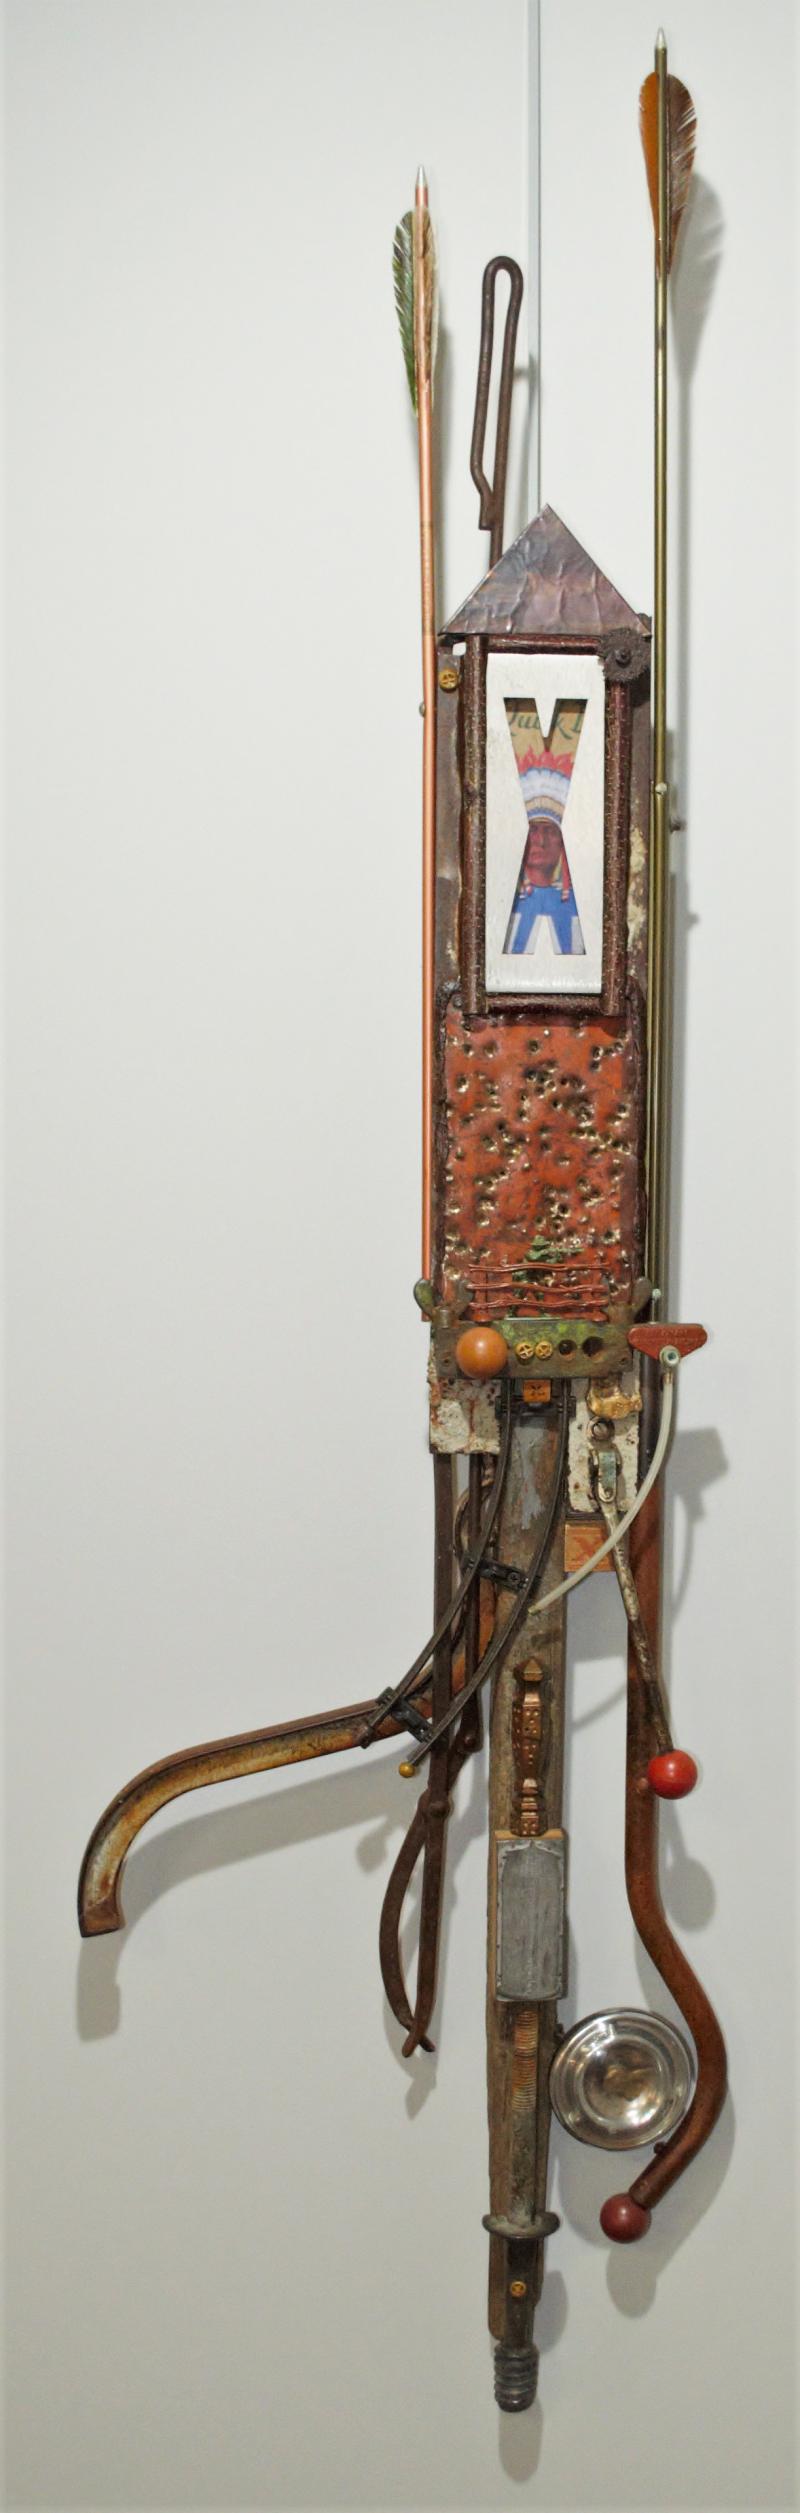 Stolen Stars, found object assemblage by Gary Carlson of Rush City, MN